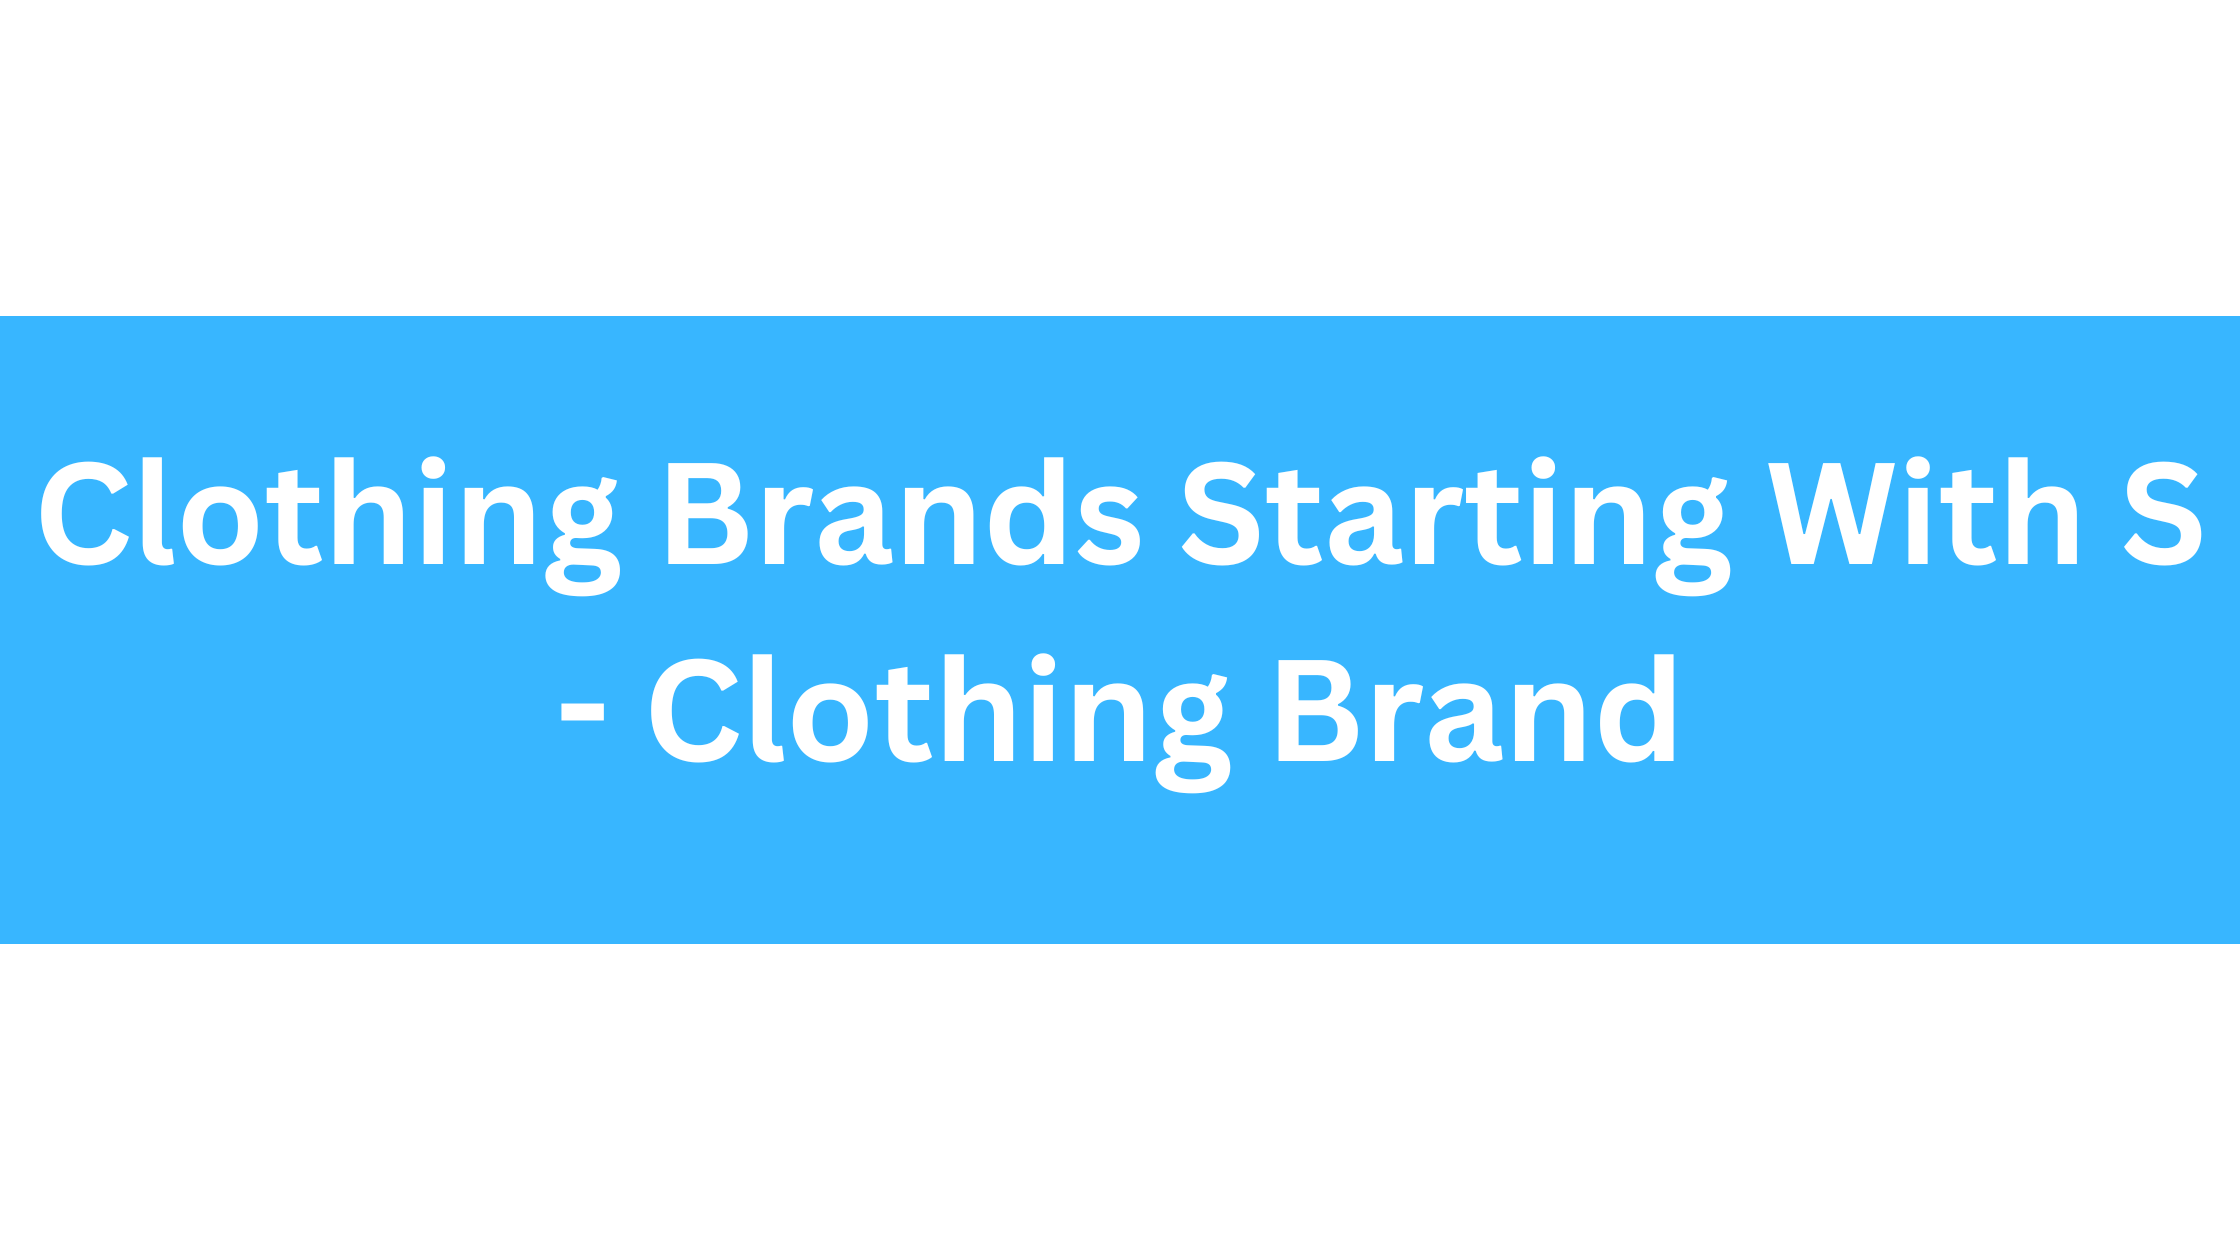 Clothing Brands Starting With S